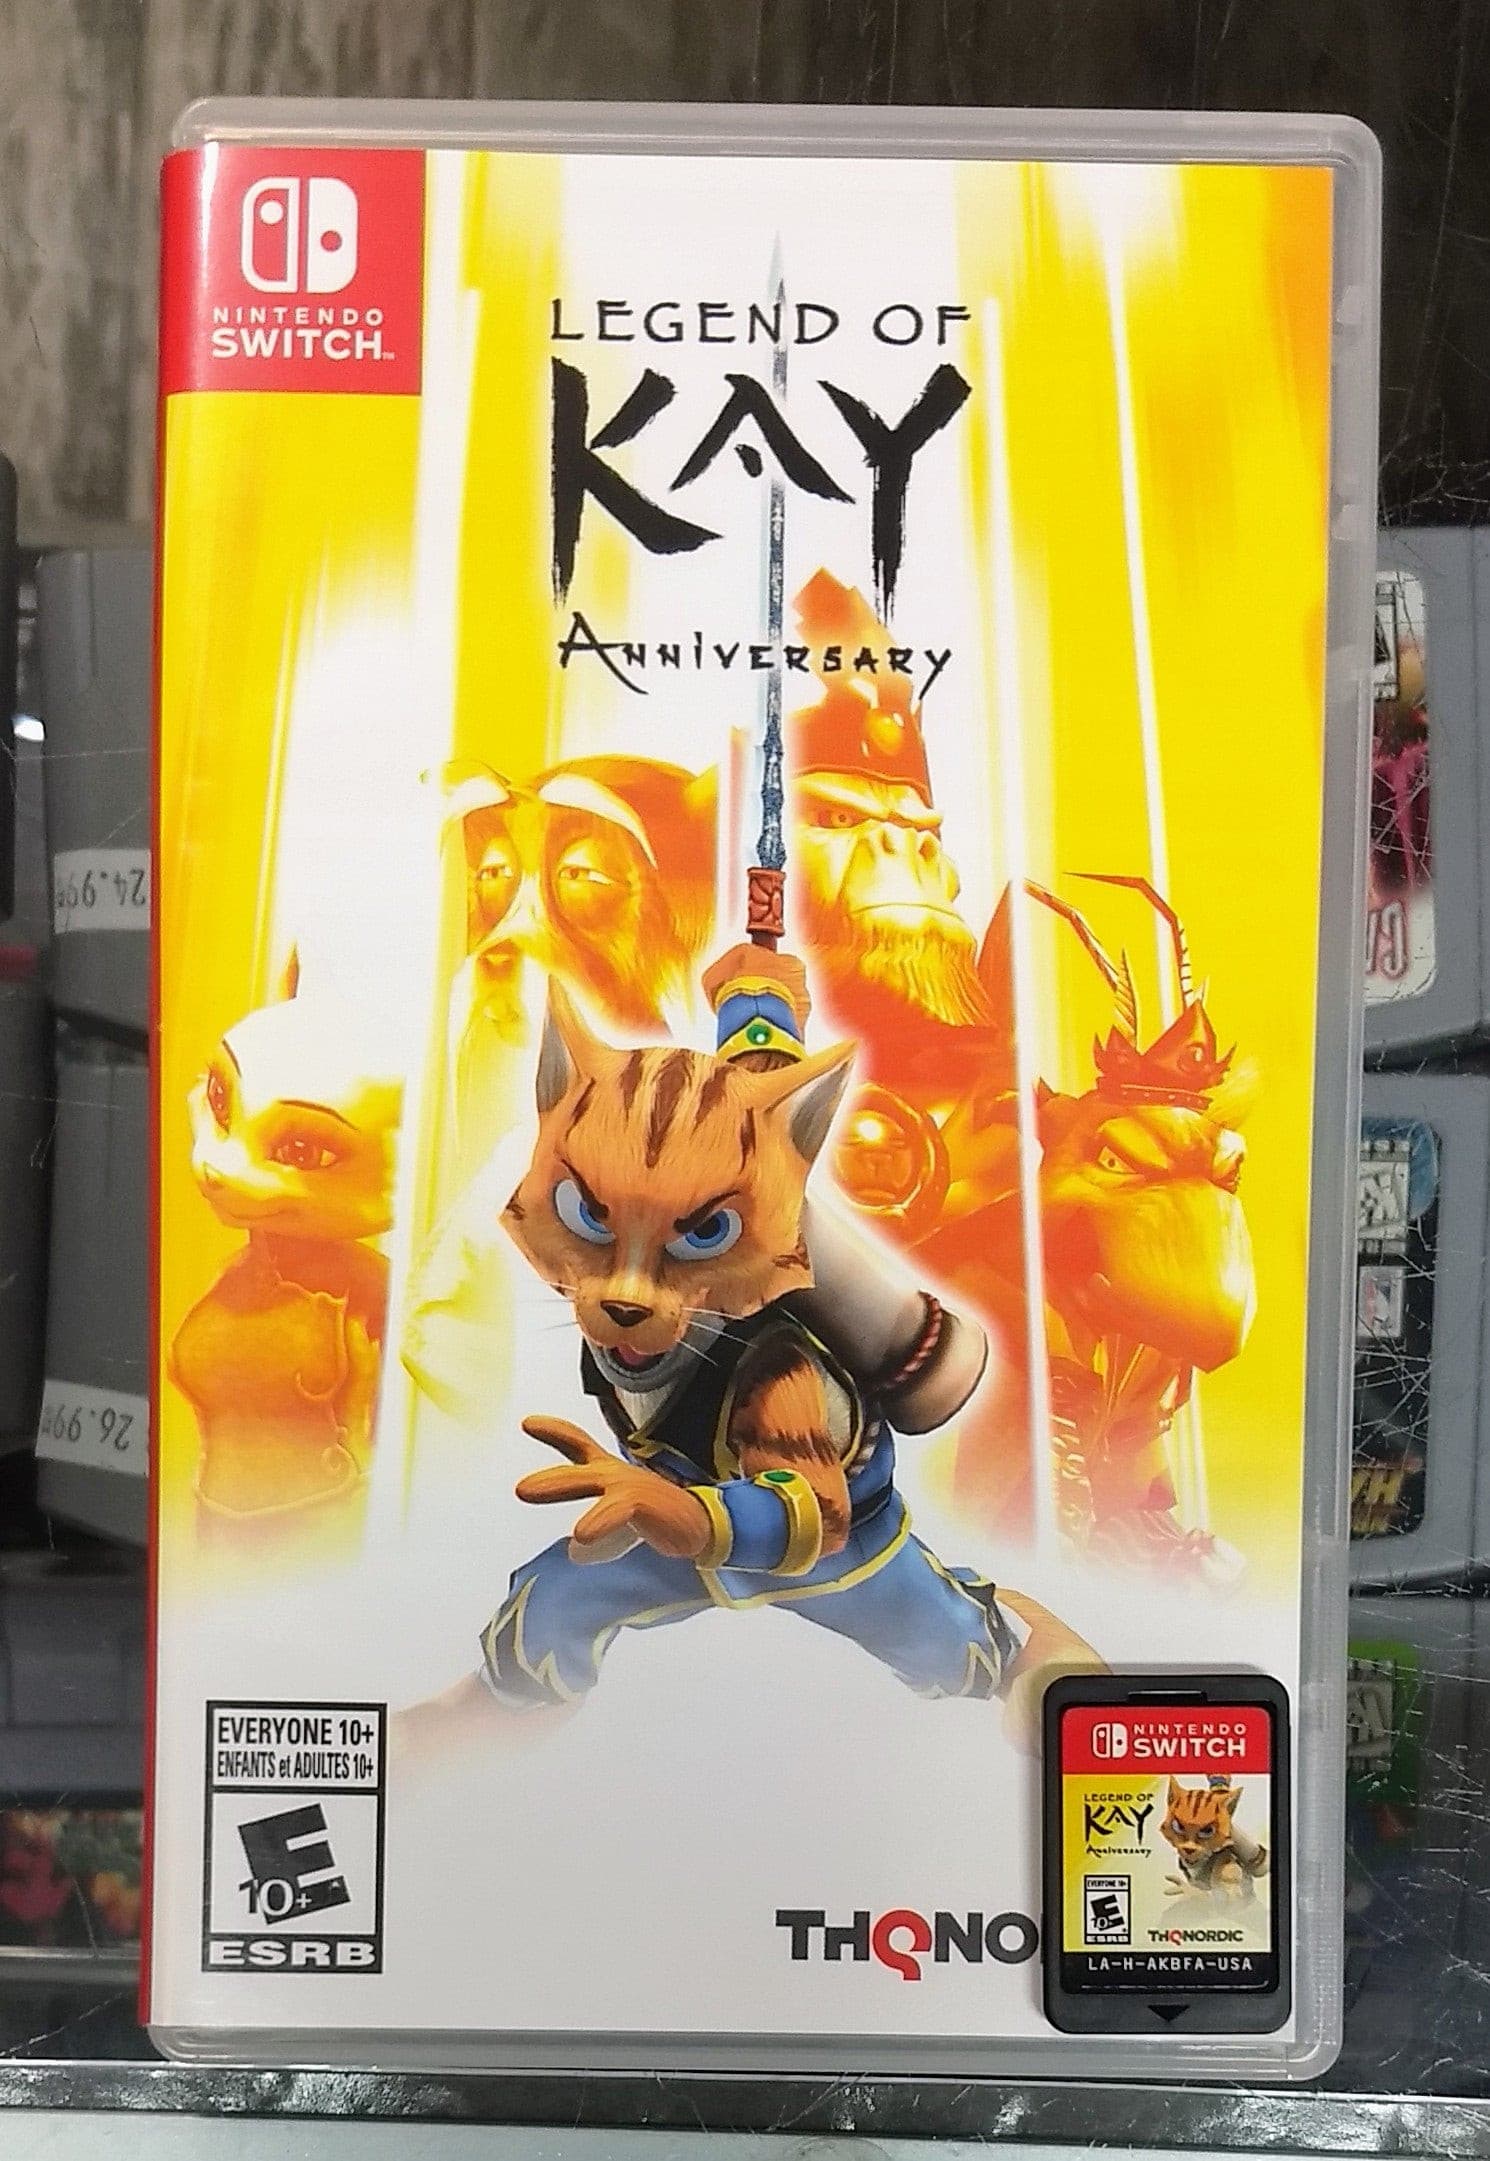 LEGEND OF KAY ANNIVERSARY (NINTENDO SWITCH) - jeux video game-x